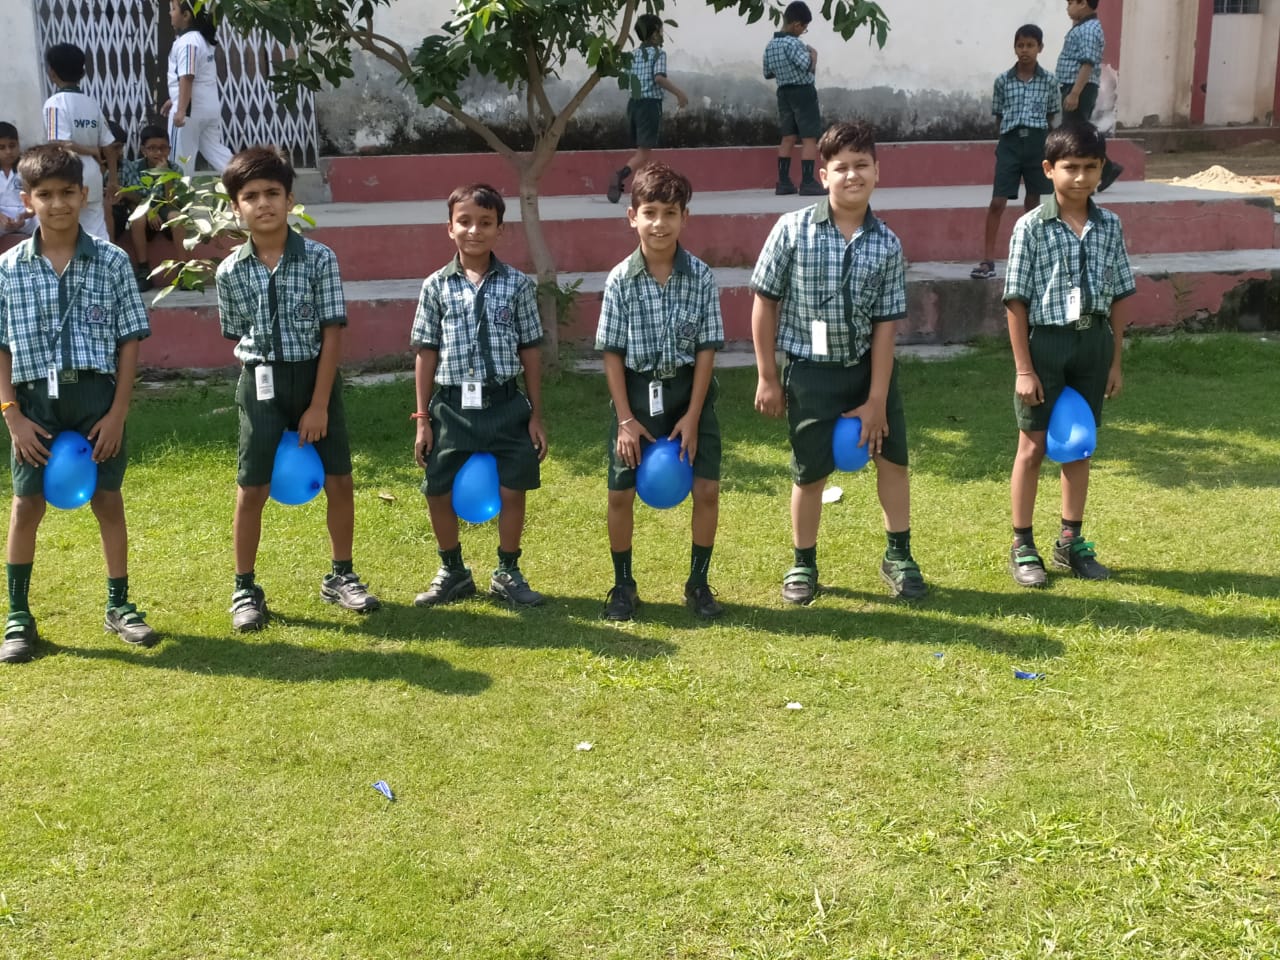 Delhi World Public School organised a balloon race activity with the students of Class 1st to 3rd.